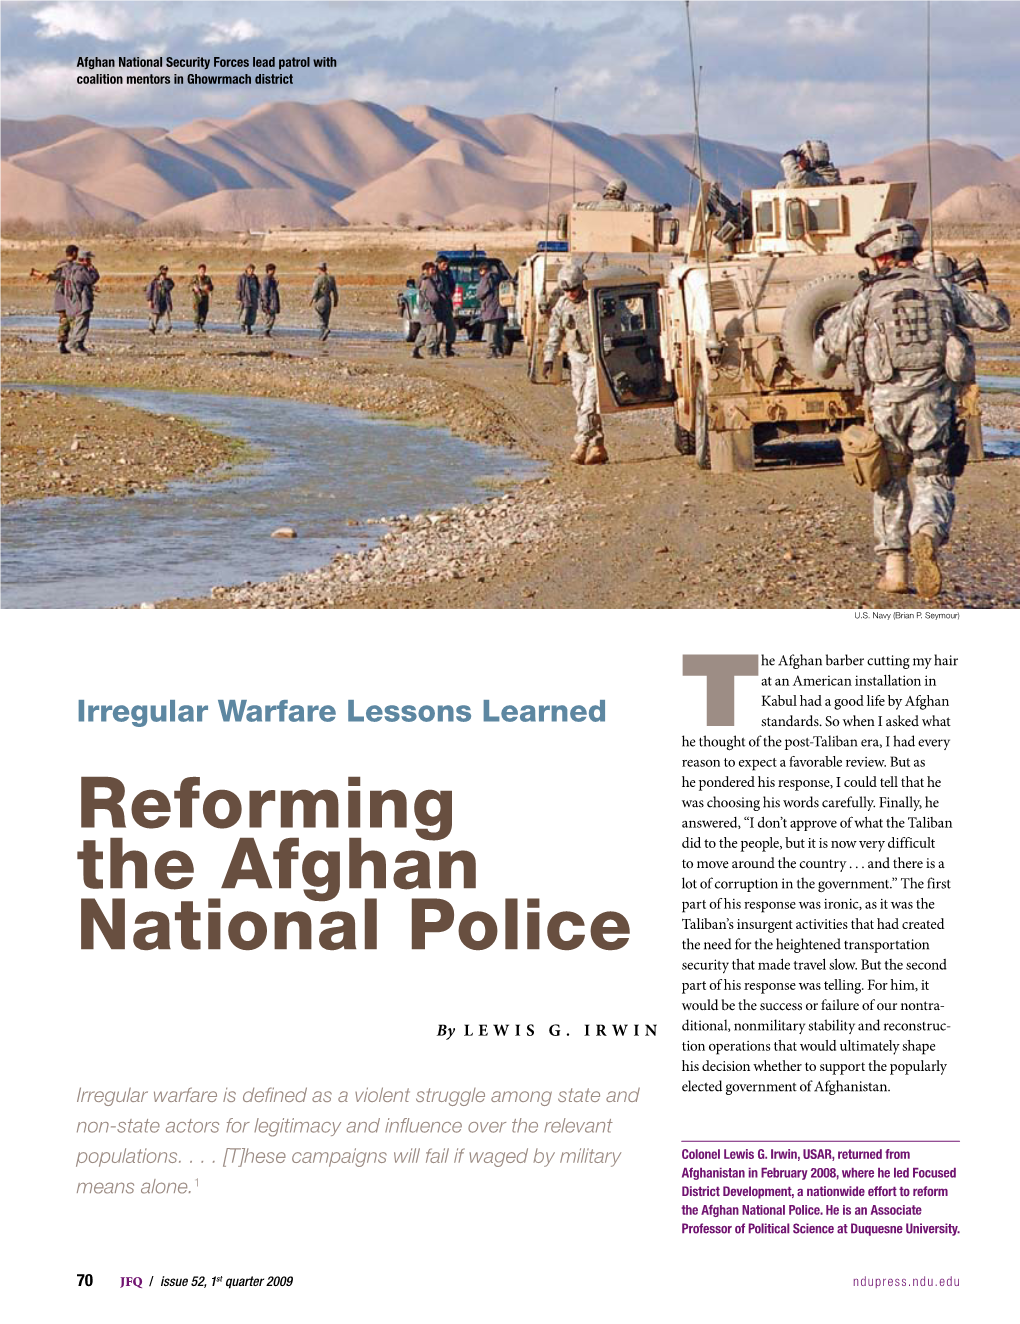 Reforming the Afghan National Police